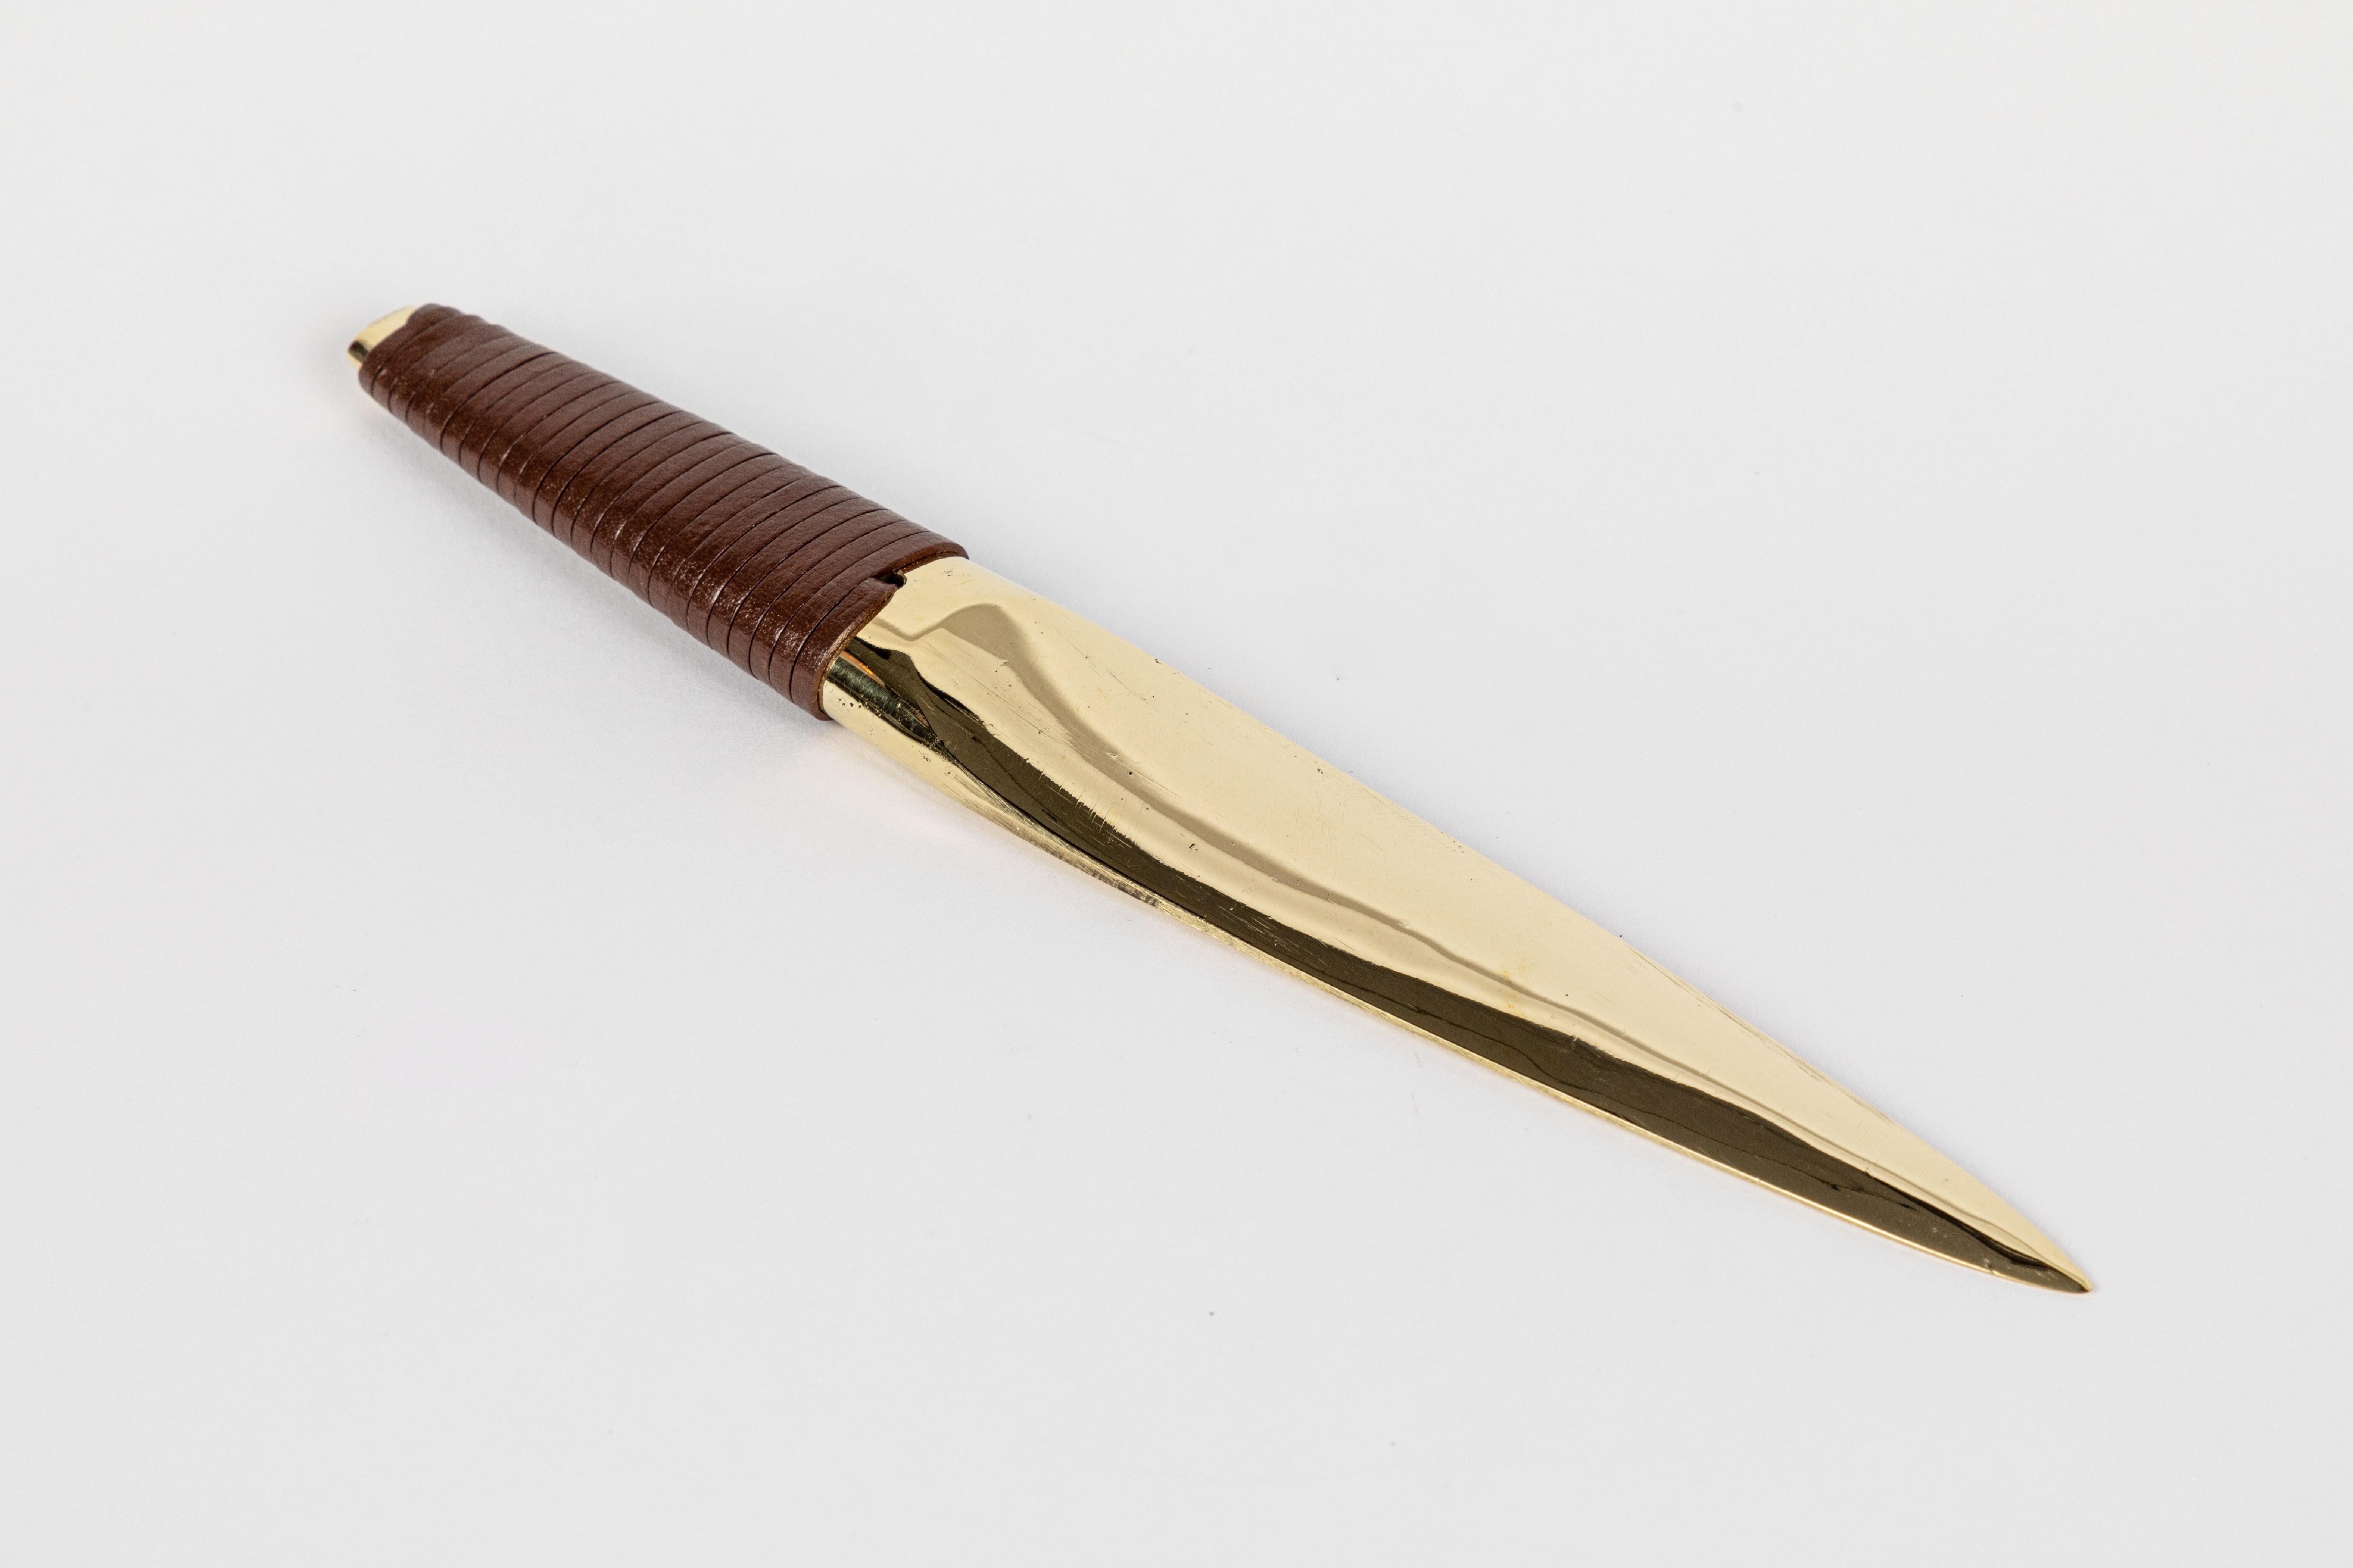 Carl Auböck Model #4233 brass and leather paper knife. Designed in the 1950s, this incredibly refined and sculptural knife is executed in polished brass and handwoven brown leather. 

Price is per item. One in stock ready to ship. Available in